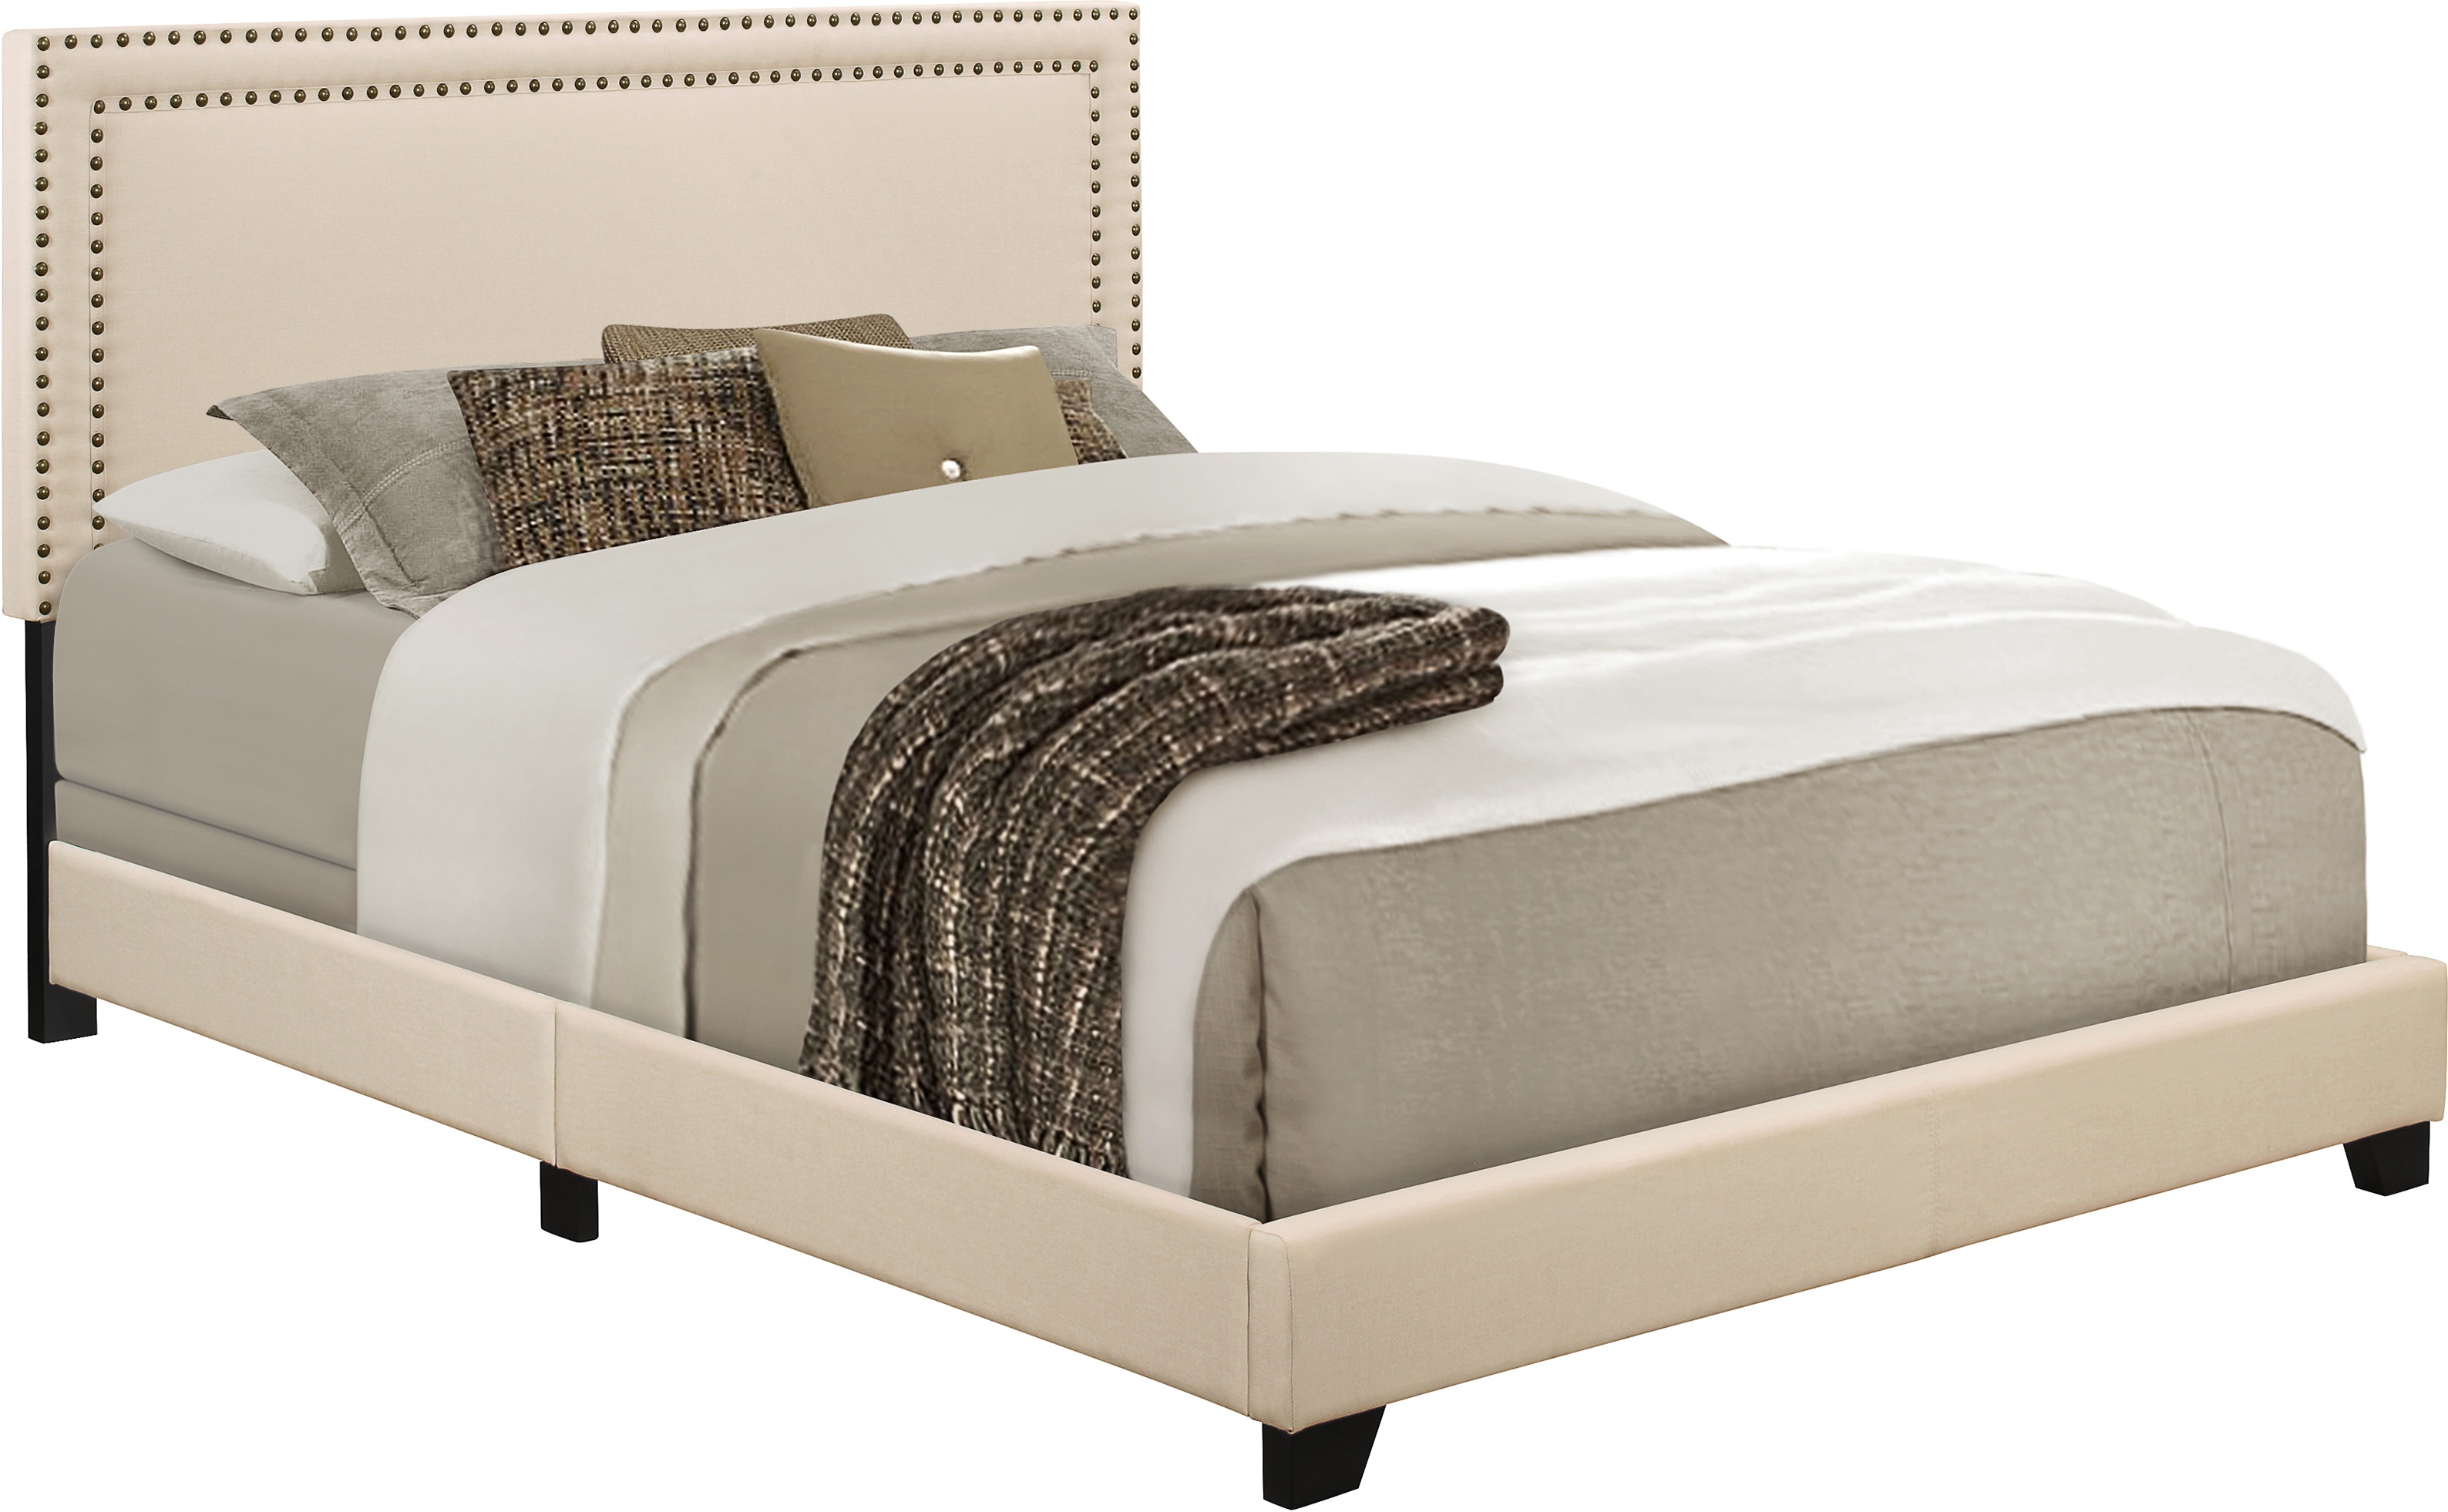 Accent Salerno Queen Upholstered Storage Bed in Cream